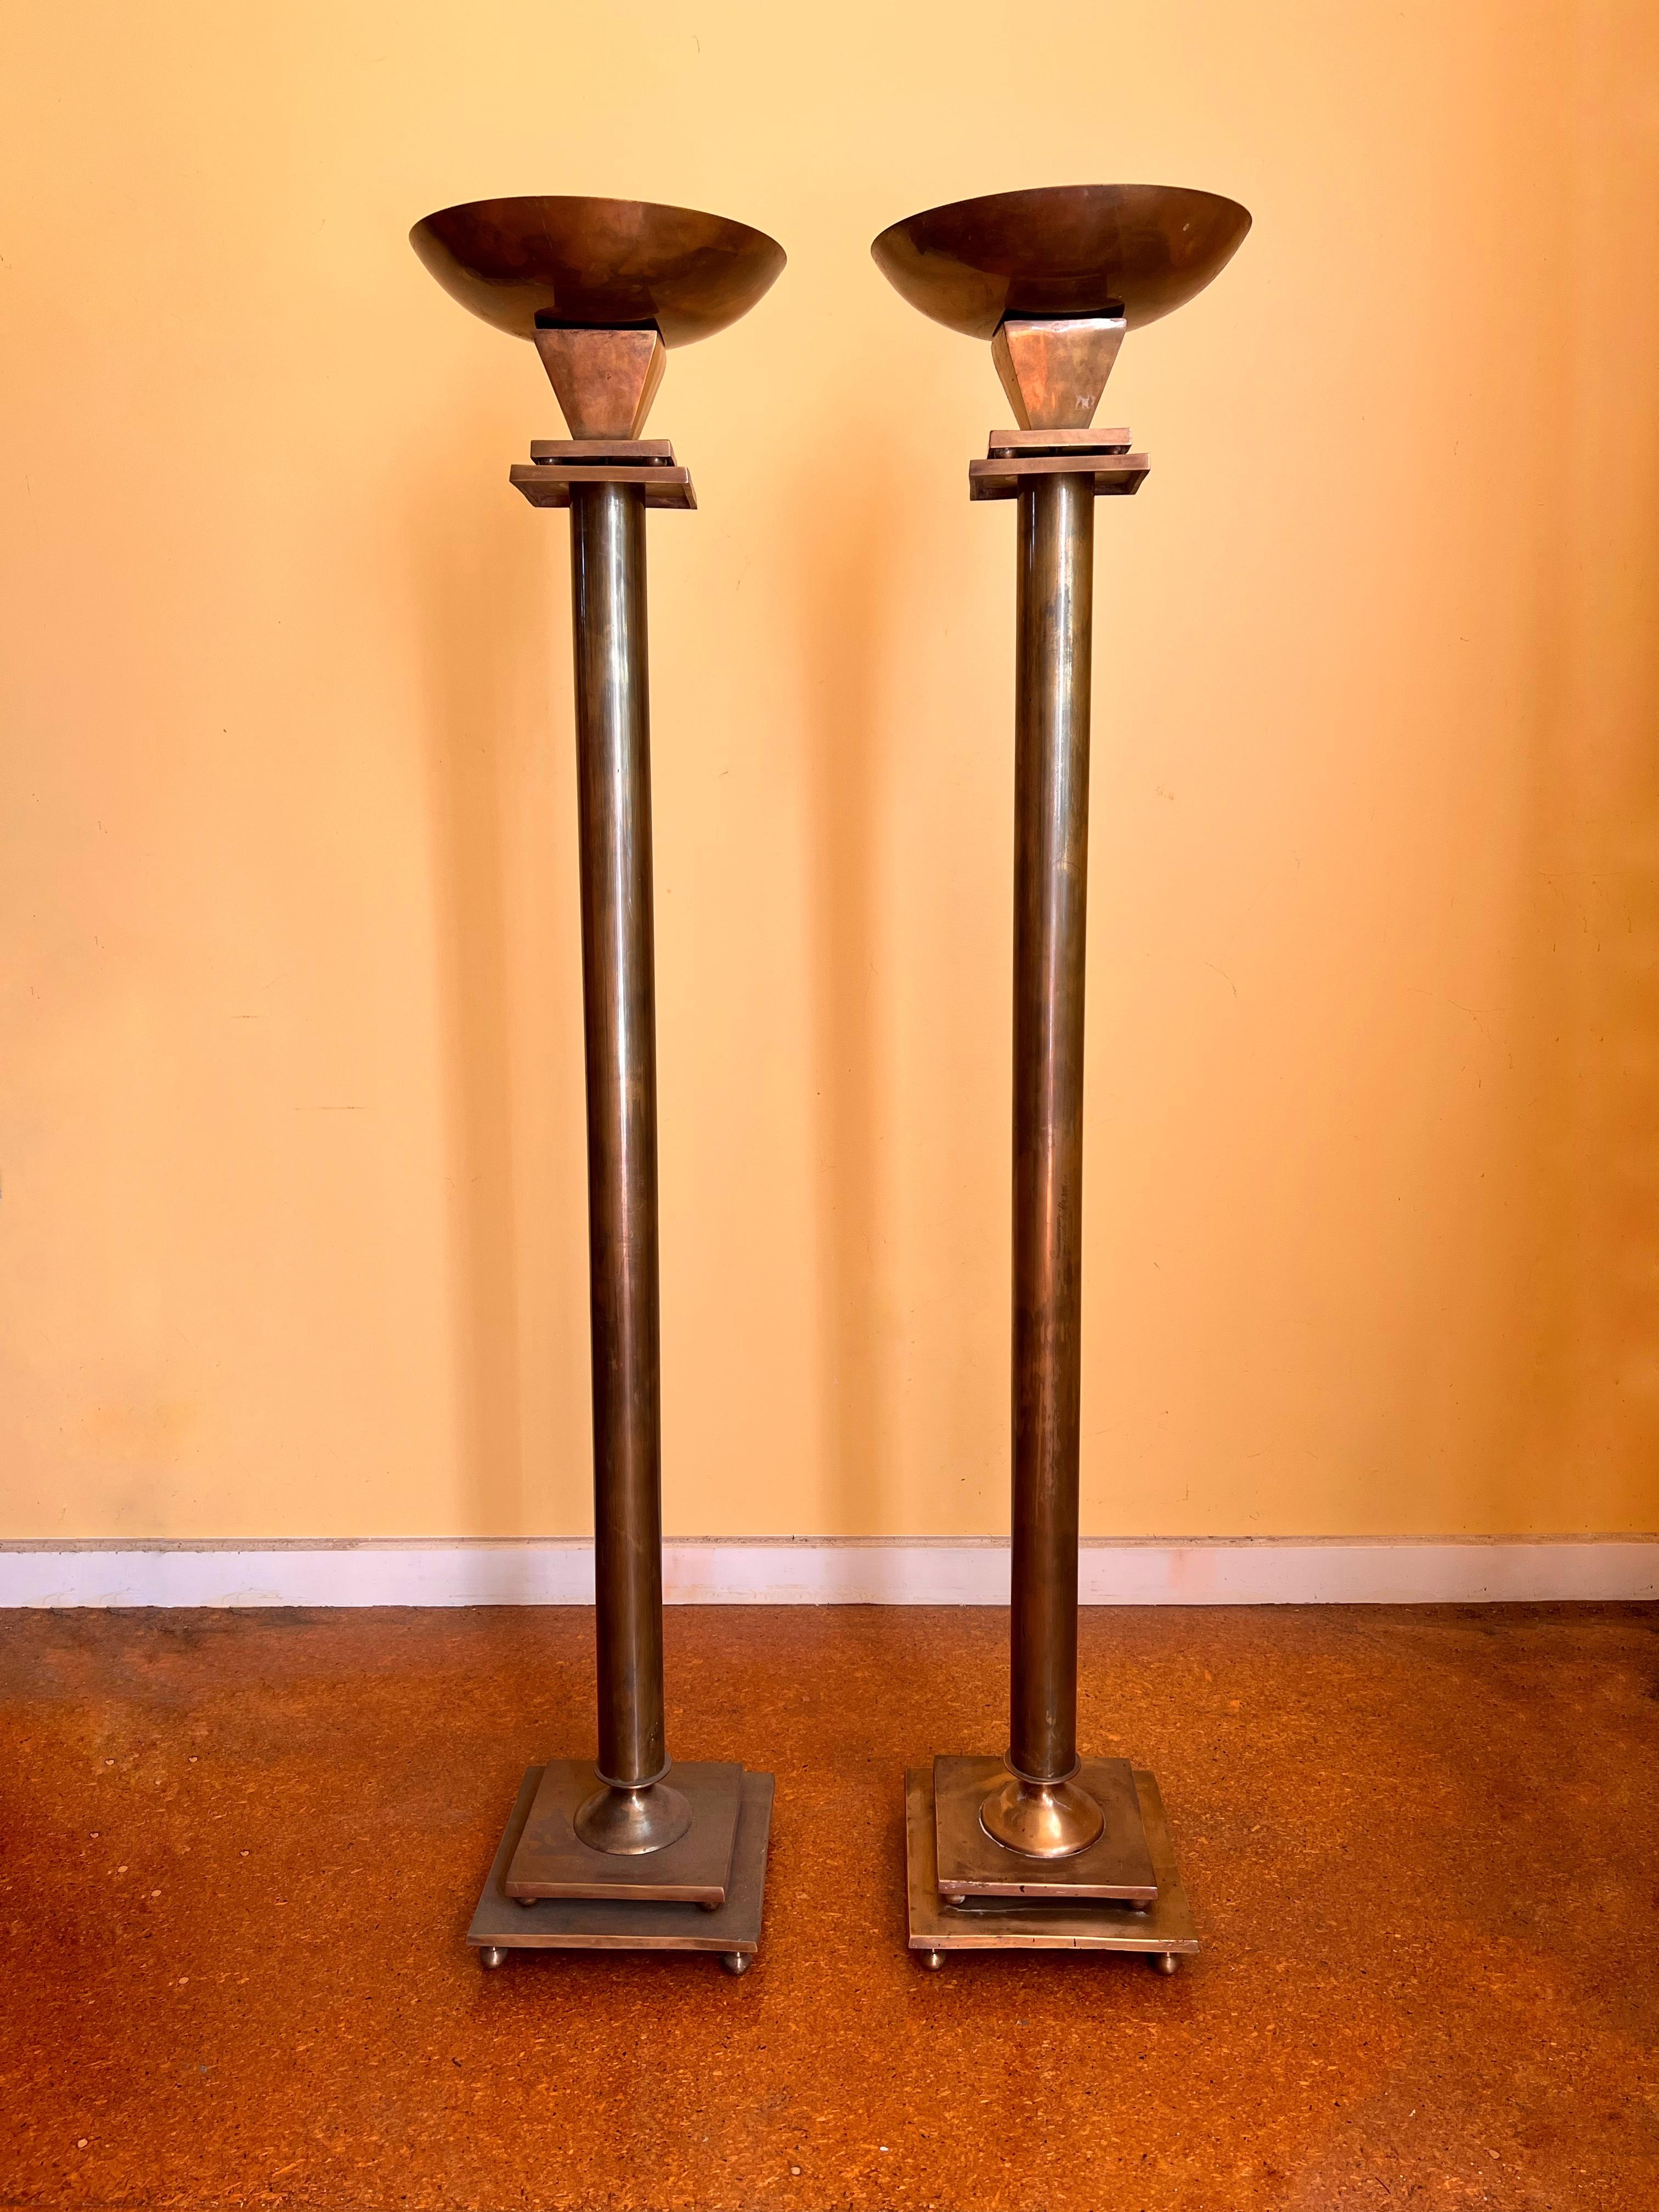 Tall Bronze Torchères. Arts and Crafts era with Art Deco feel. The bronze has aged with a beautiful patina. Square plates sit upon bronze balls. Beautiful shape and sculptural art. Inside the top torch is a spike to place a candle.

1200cm high